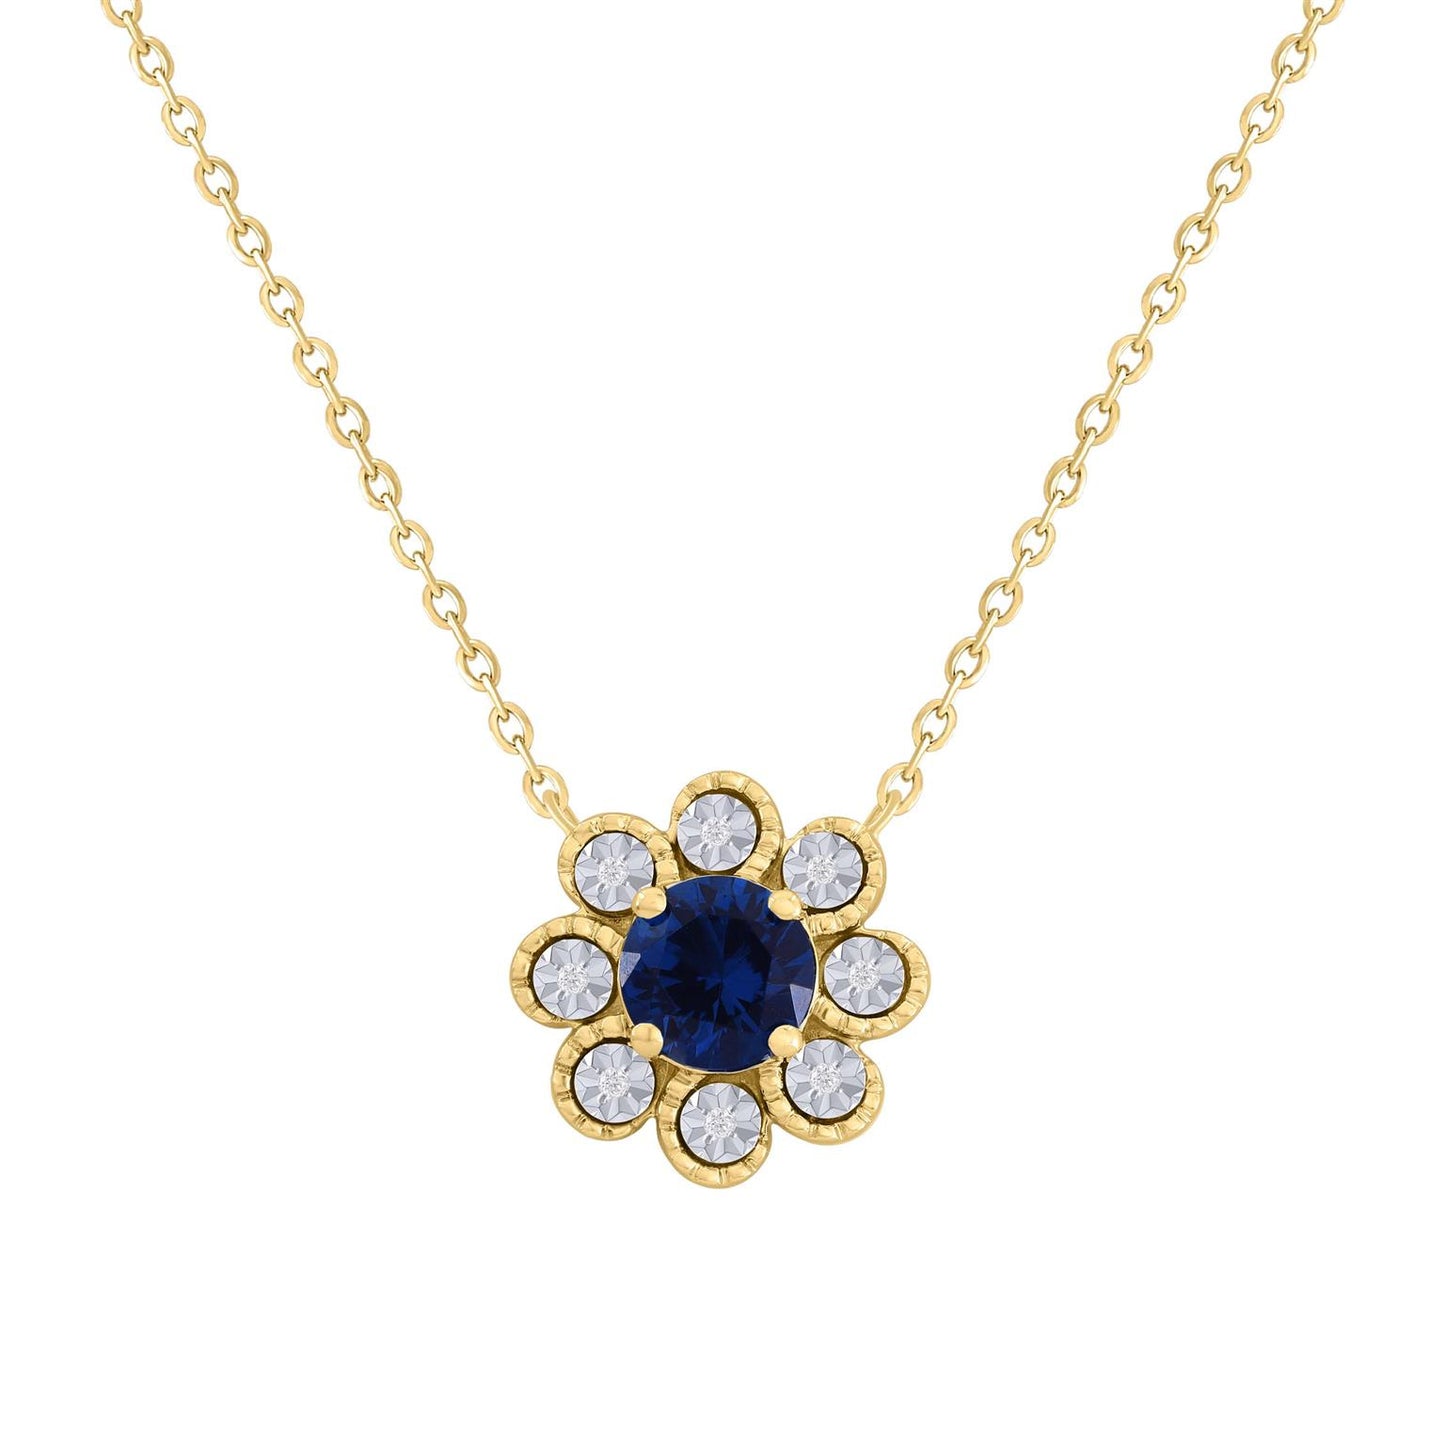 Flower Diamond Necklace with Color Stone in the middle